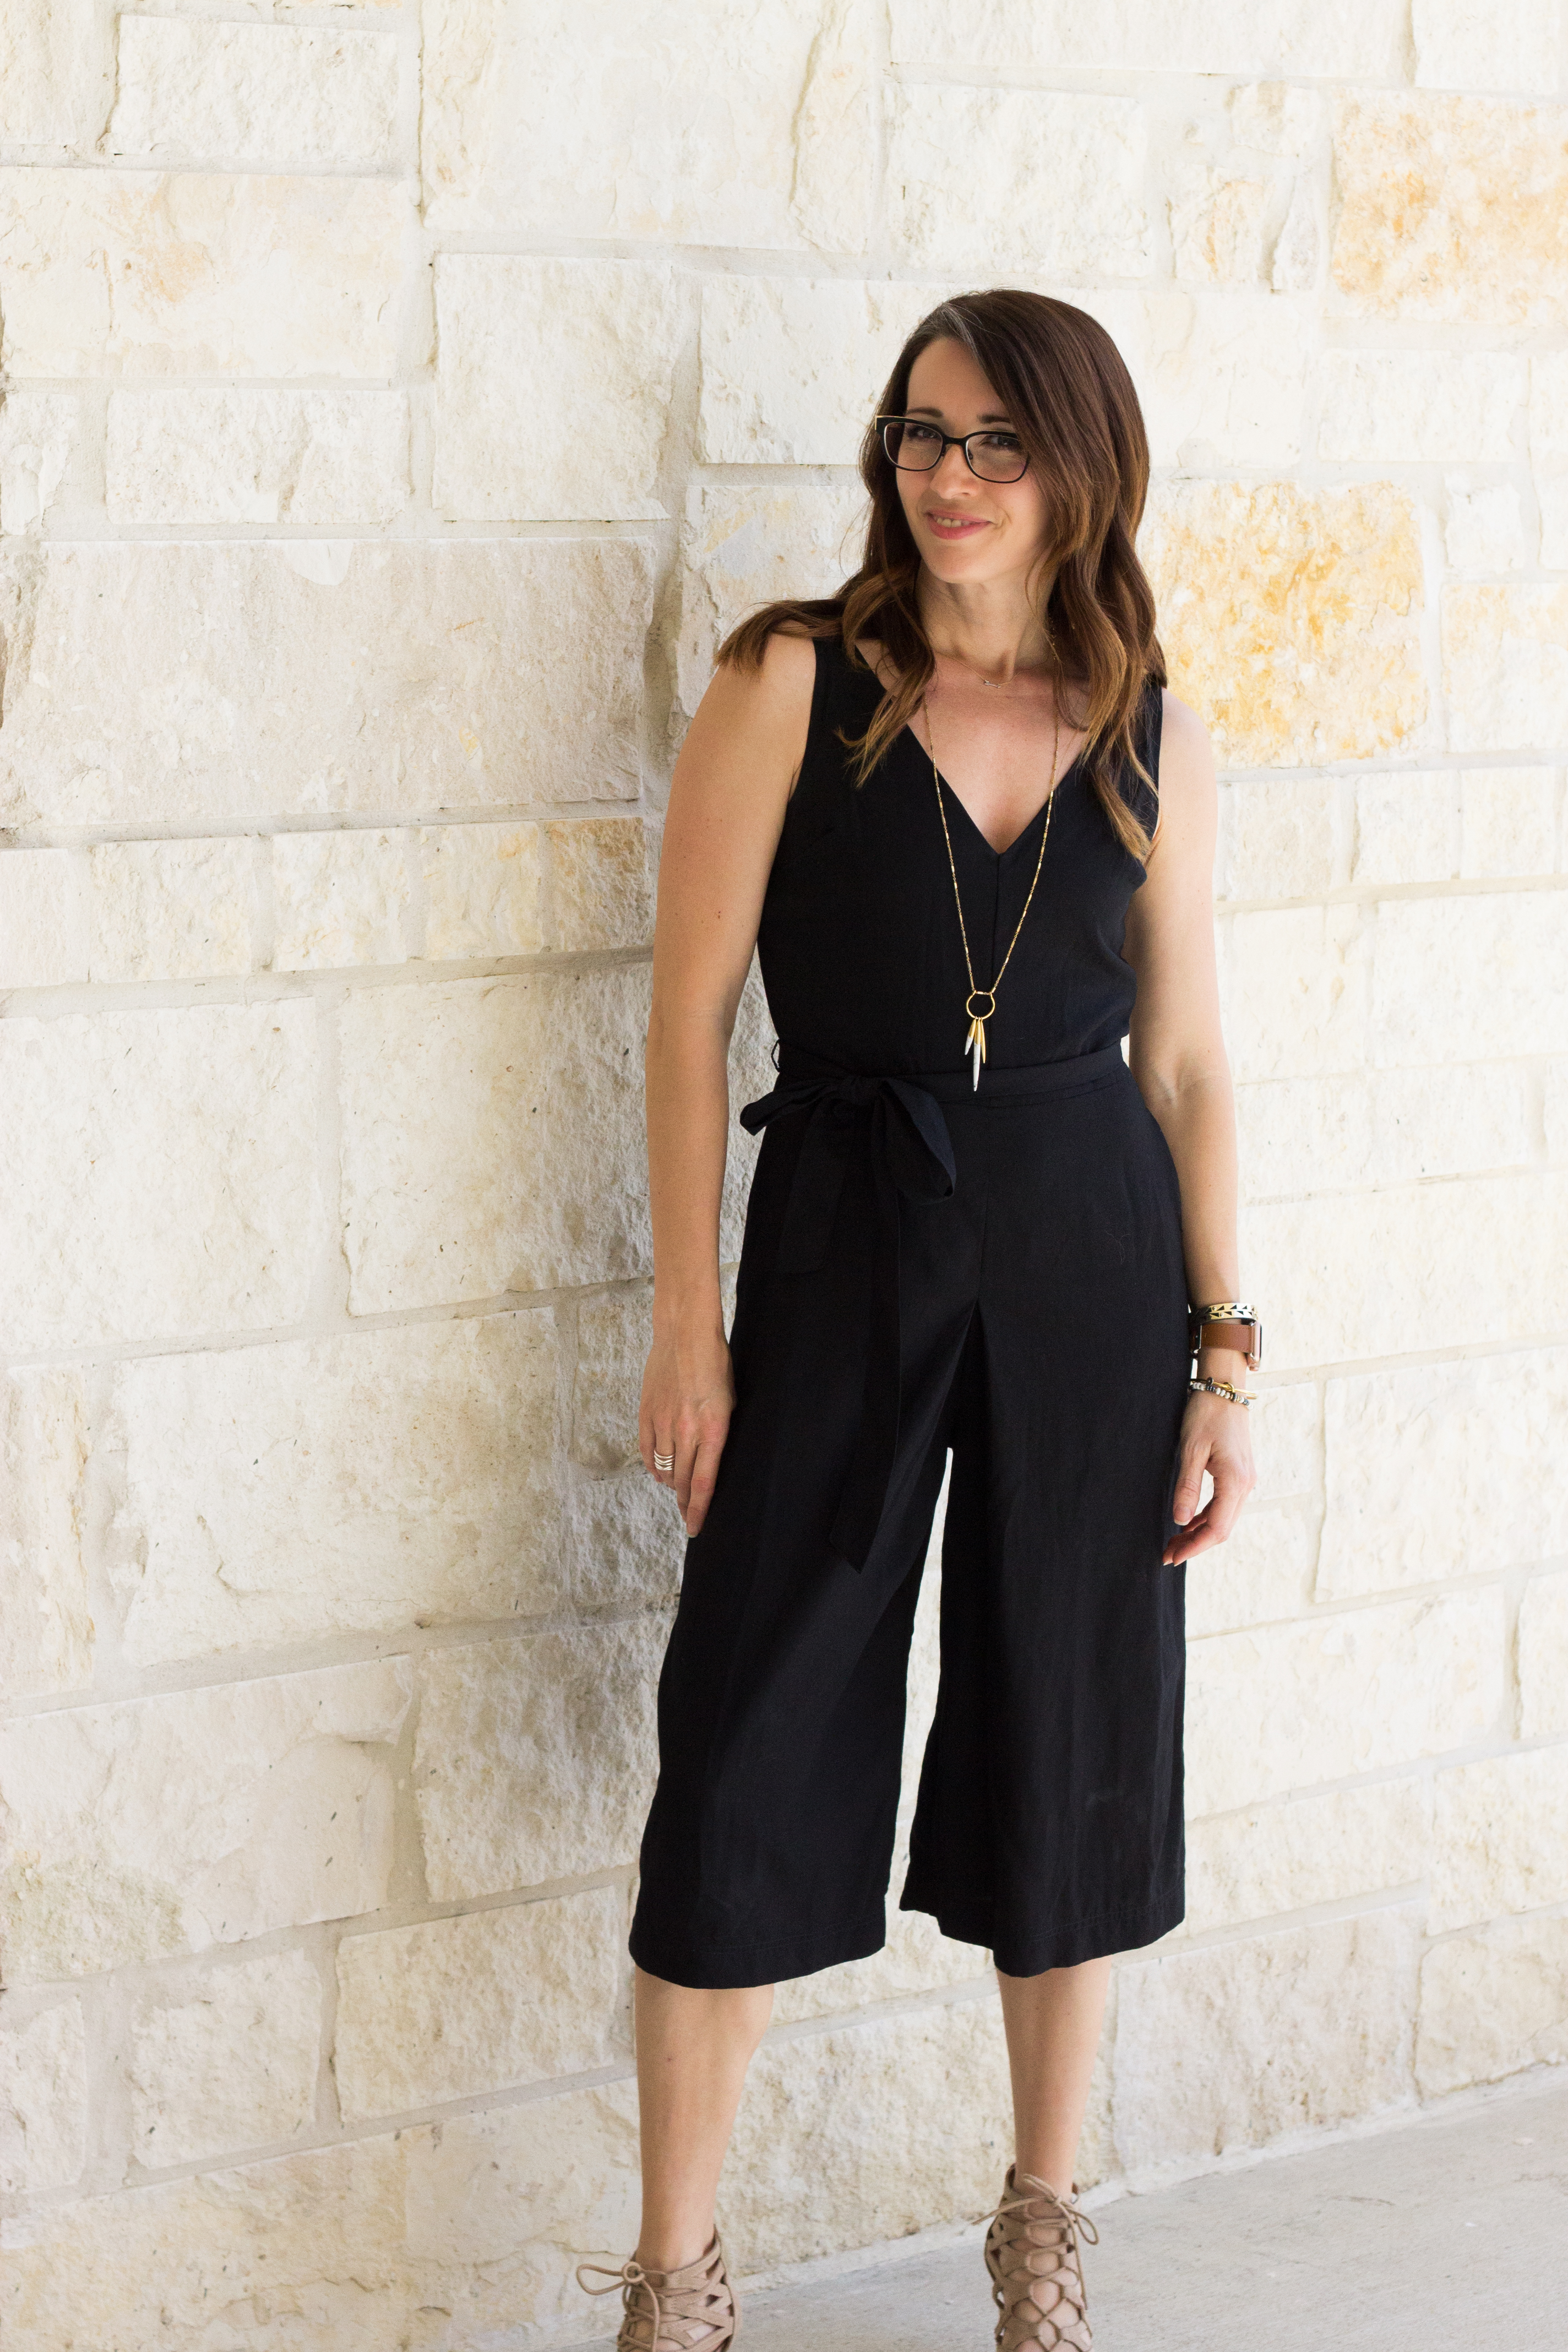 Jumpsuit into Spring